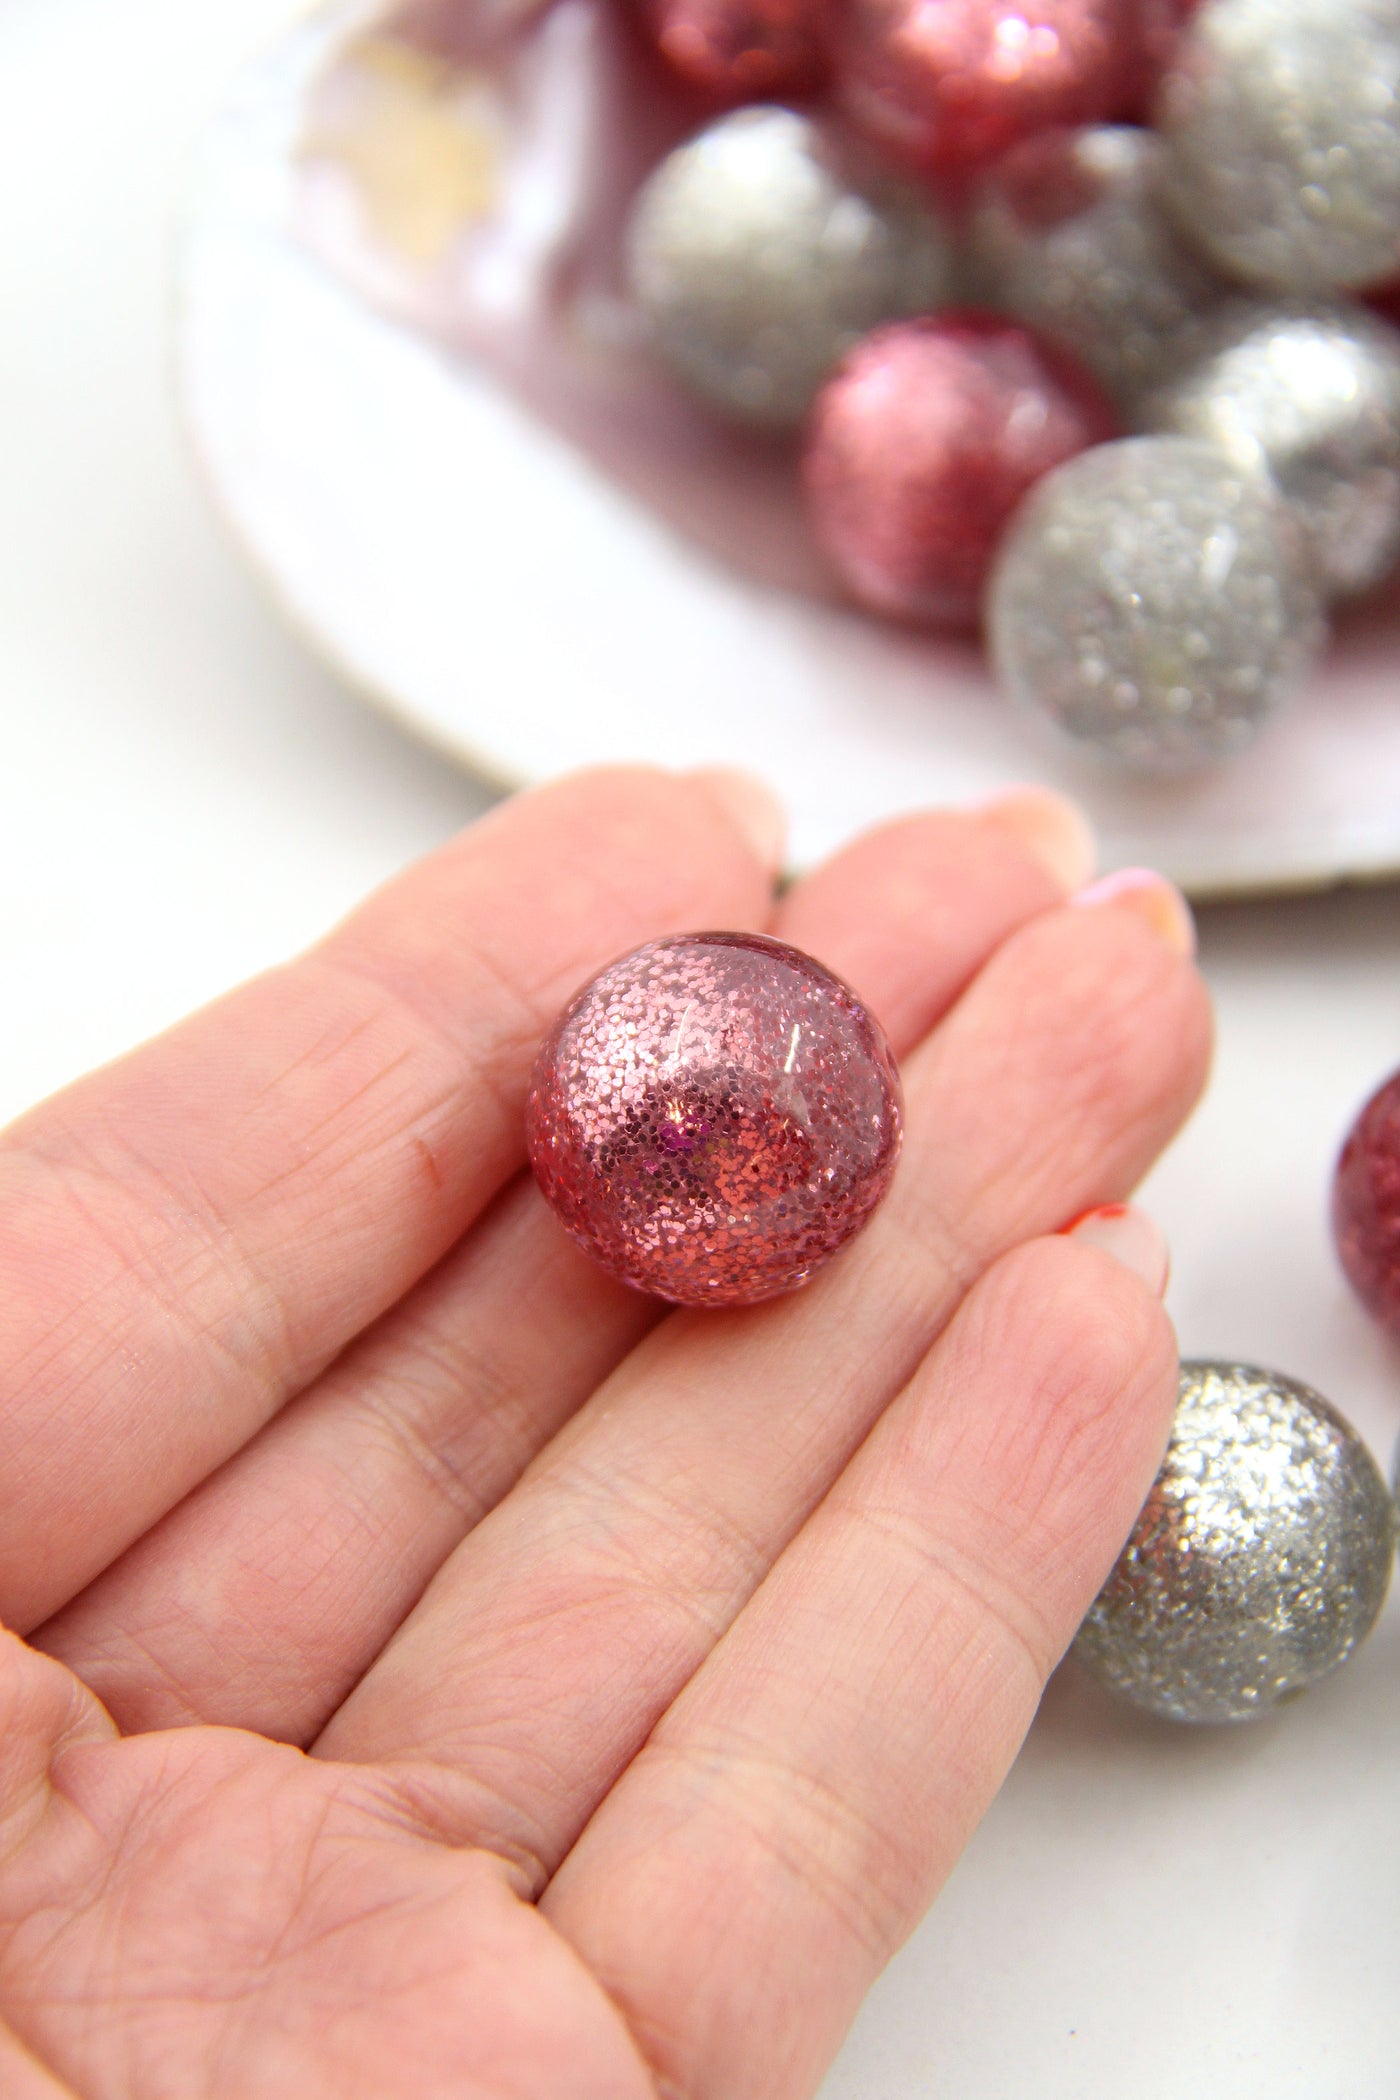 1980's style Silver and Rose colored large resin glittery beads